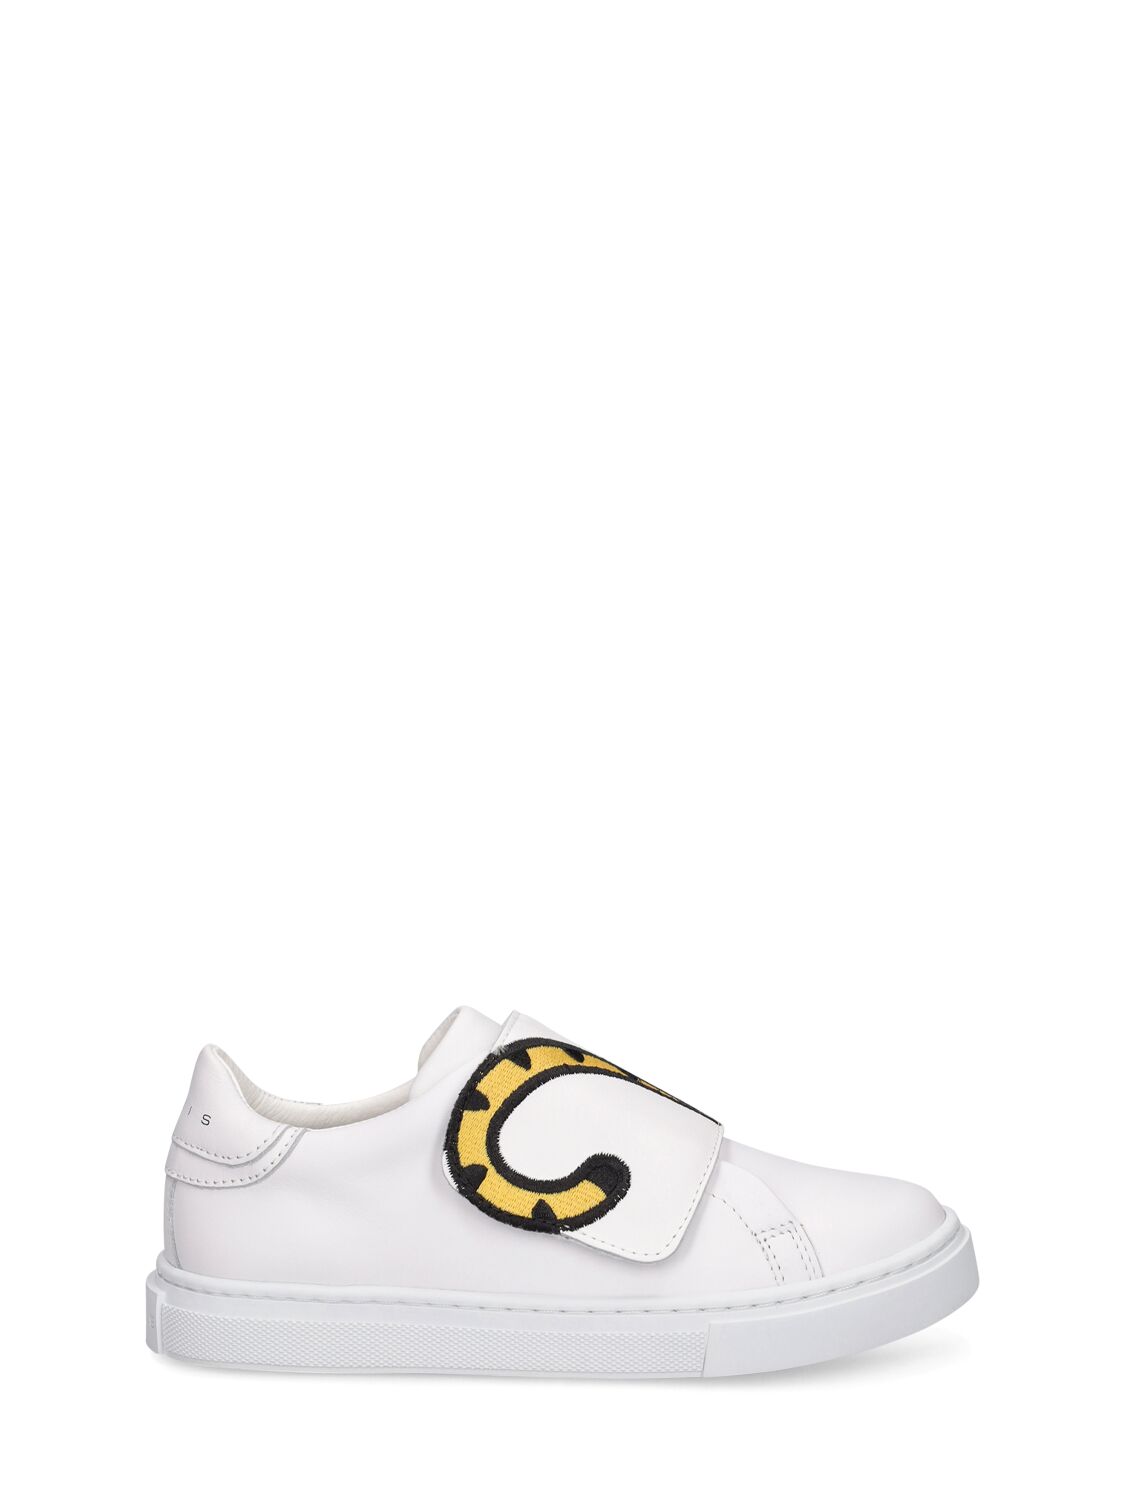 Kenzo Kids' Tiger Printed Leather Sneakers W/ Straps In White